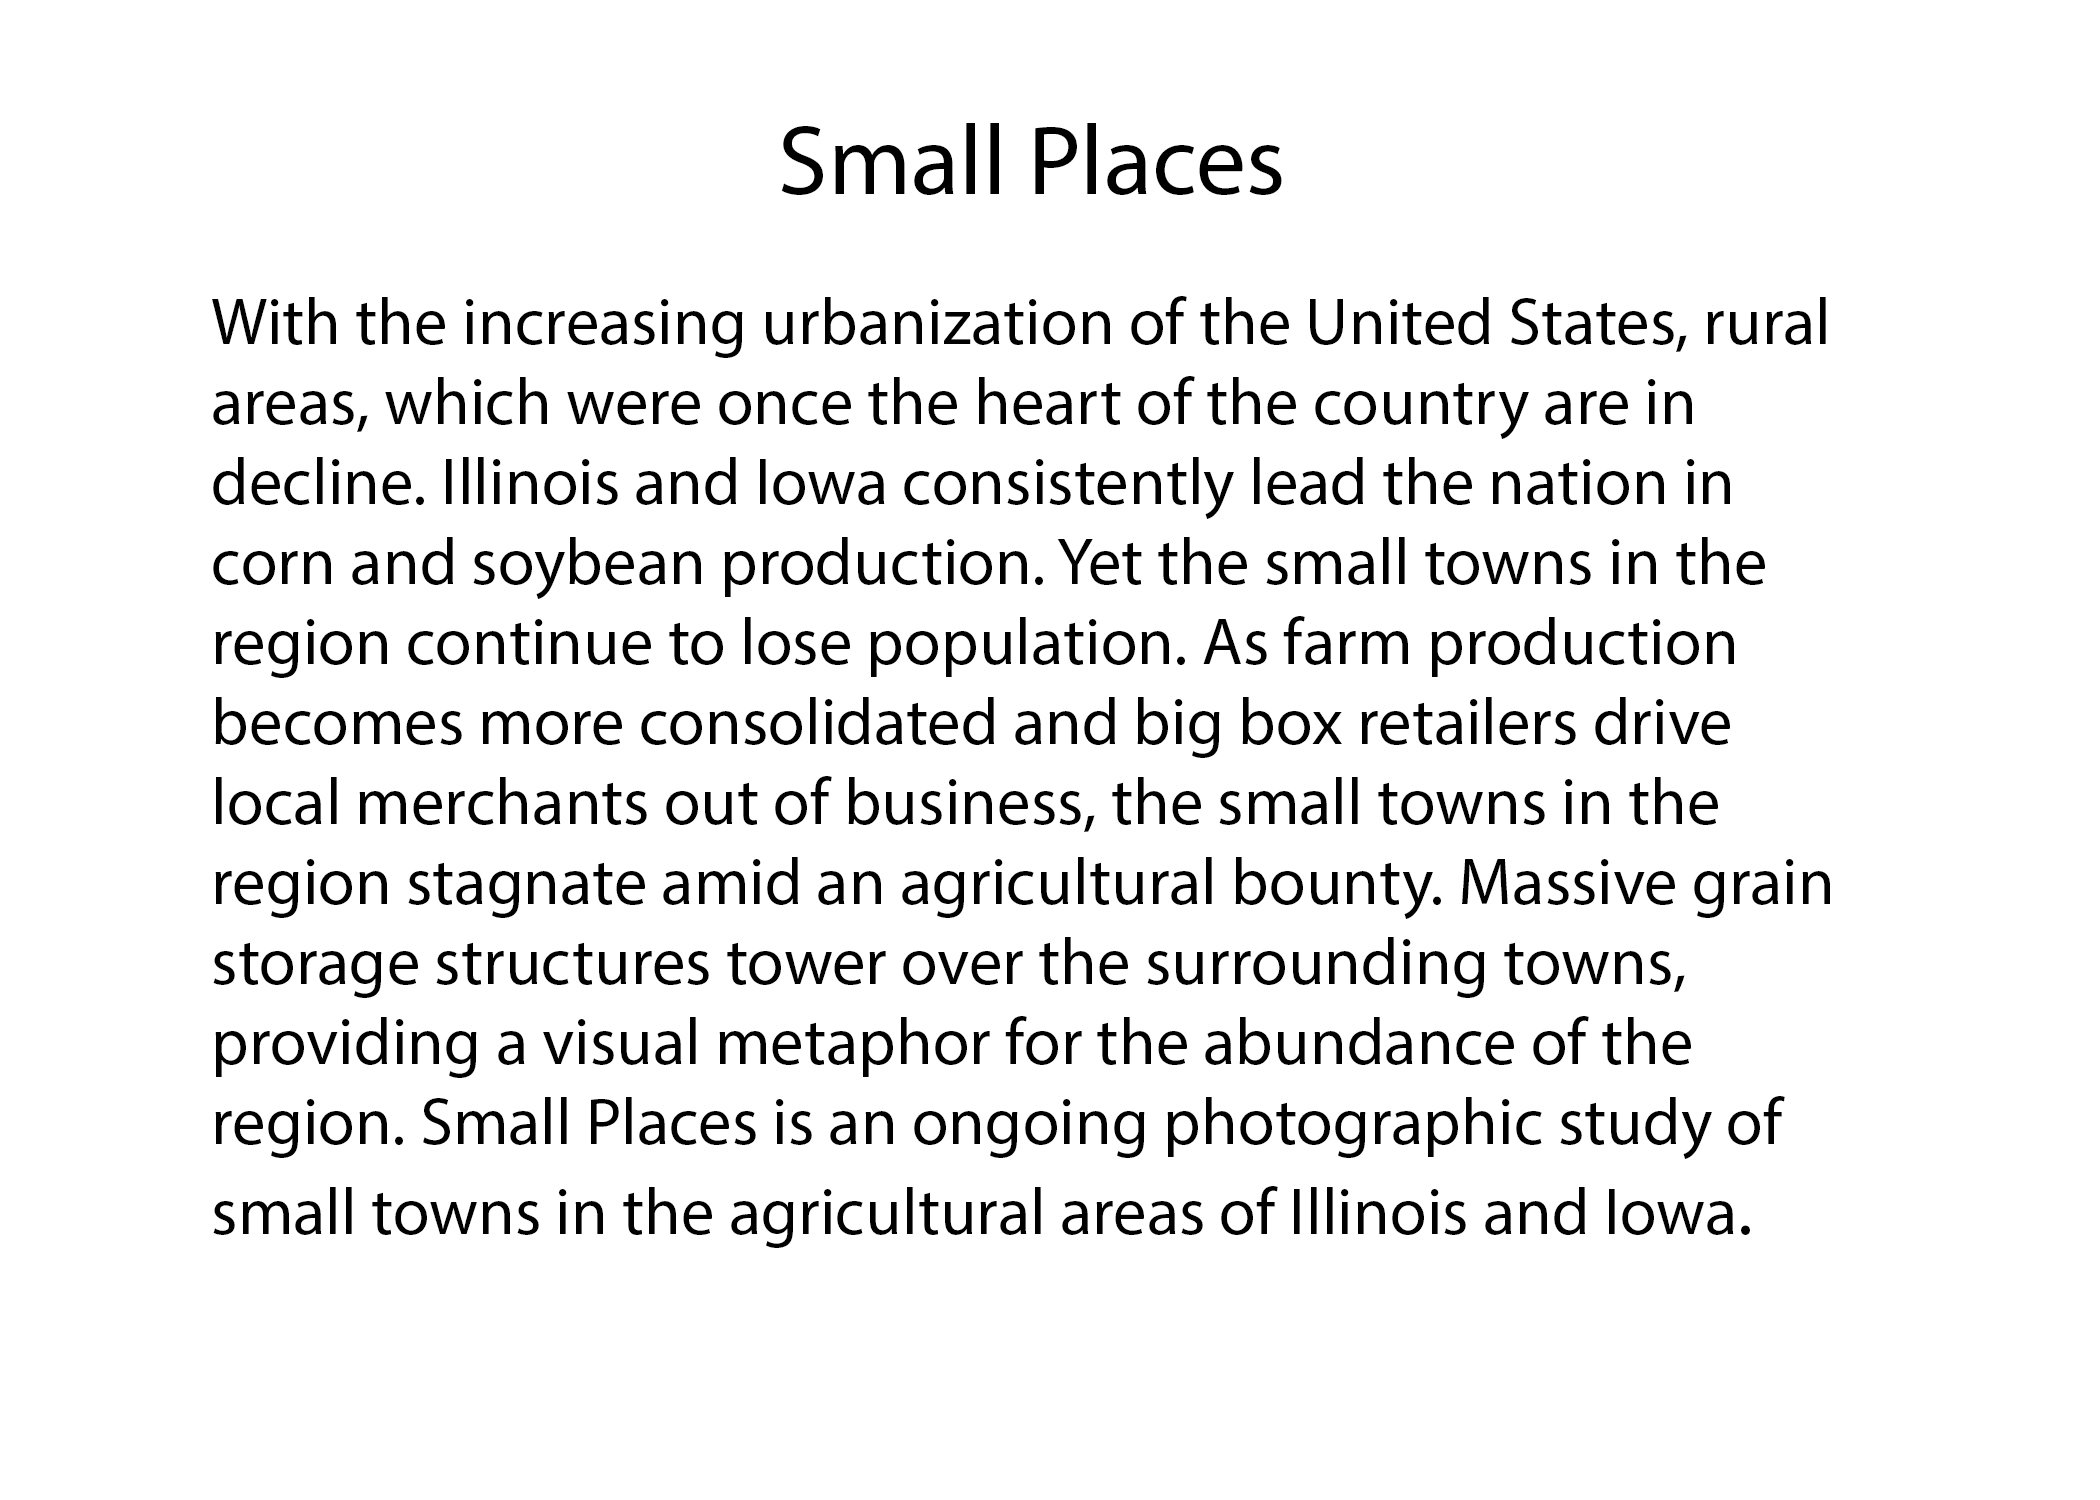 small places copy.jpg